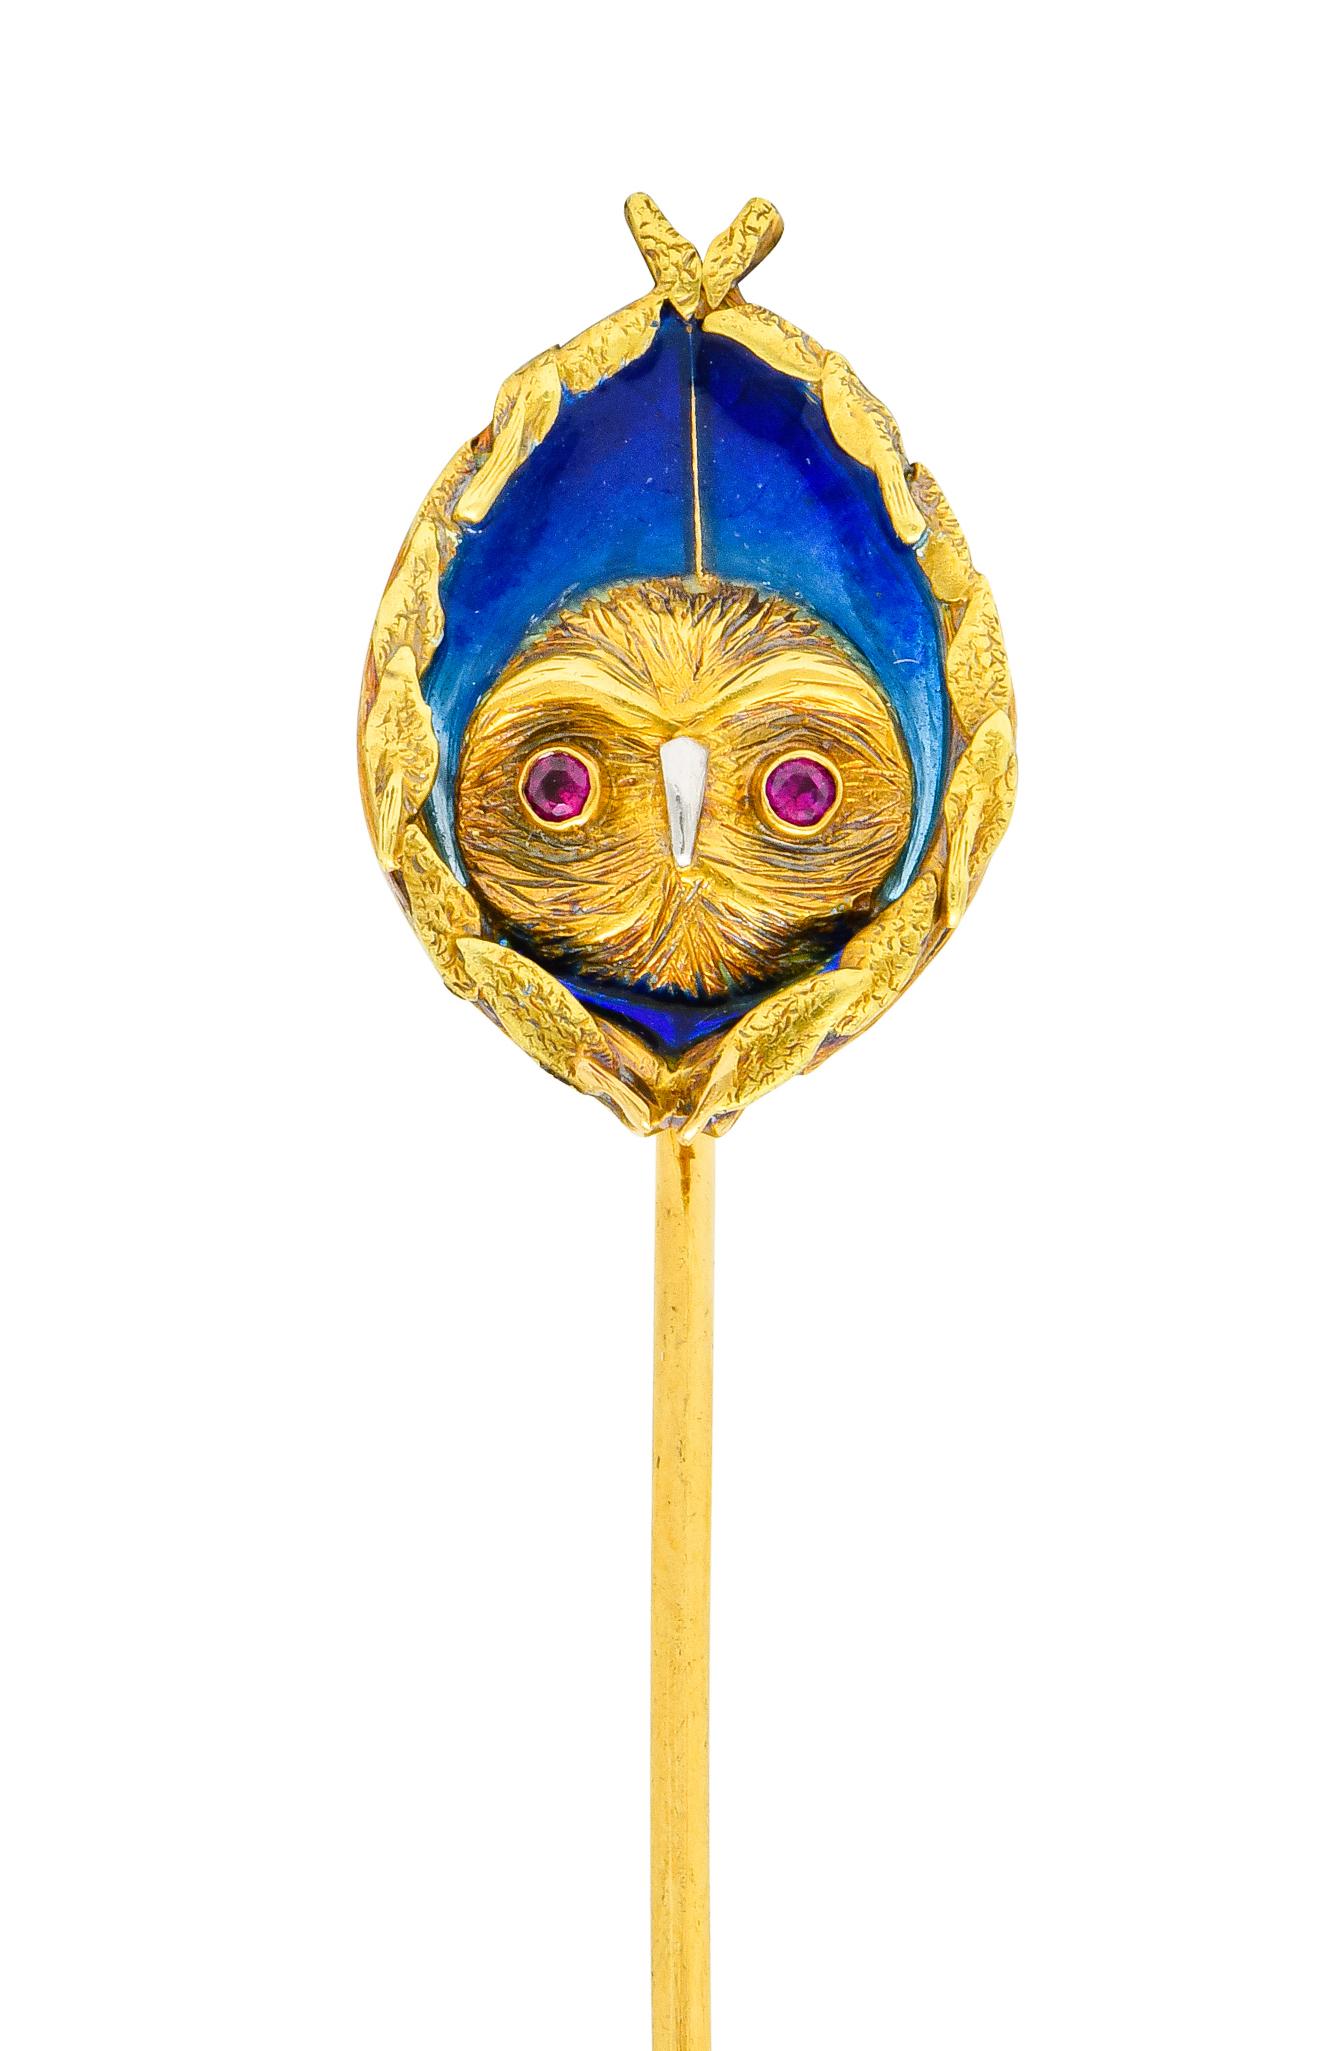 Centering a highly textured owl face accented by round cut ruby eyes and a shining platinum beak

Surrounded by serene plique-á-jour royal blue enamel, in excellent condition

Completed by wreath border comprised of stylized foliate

Tested as 18